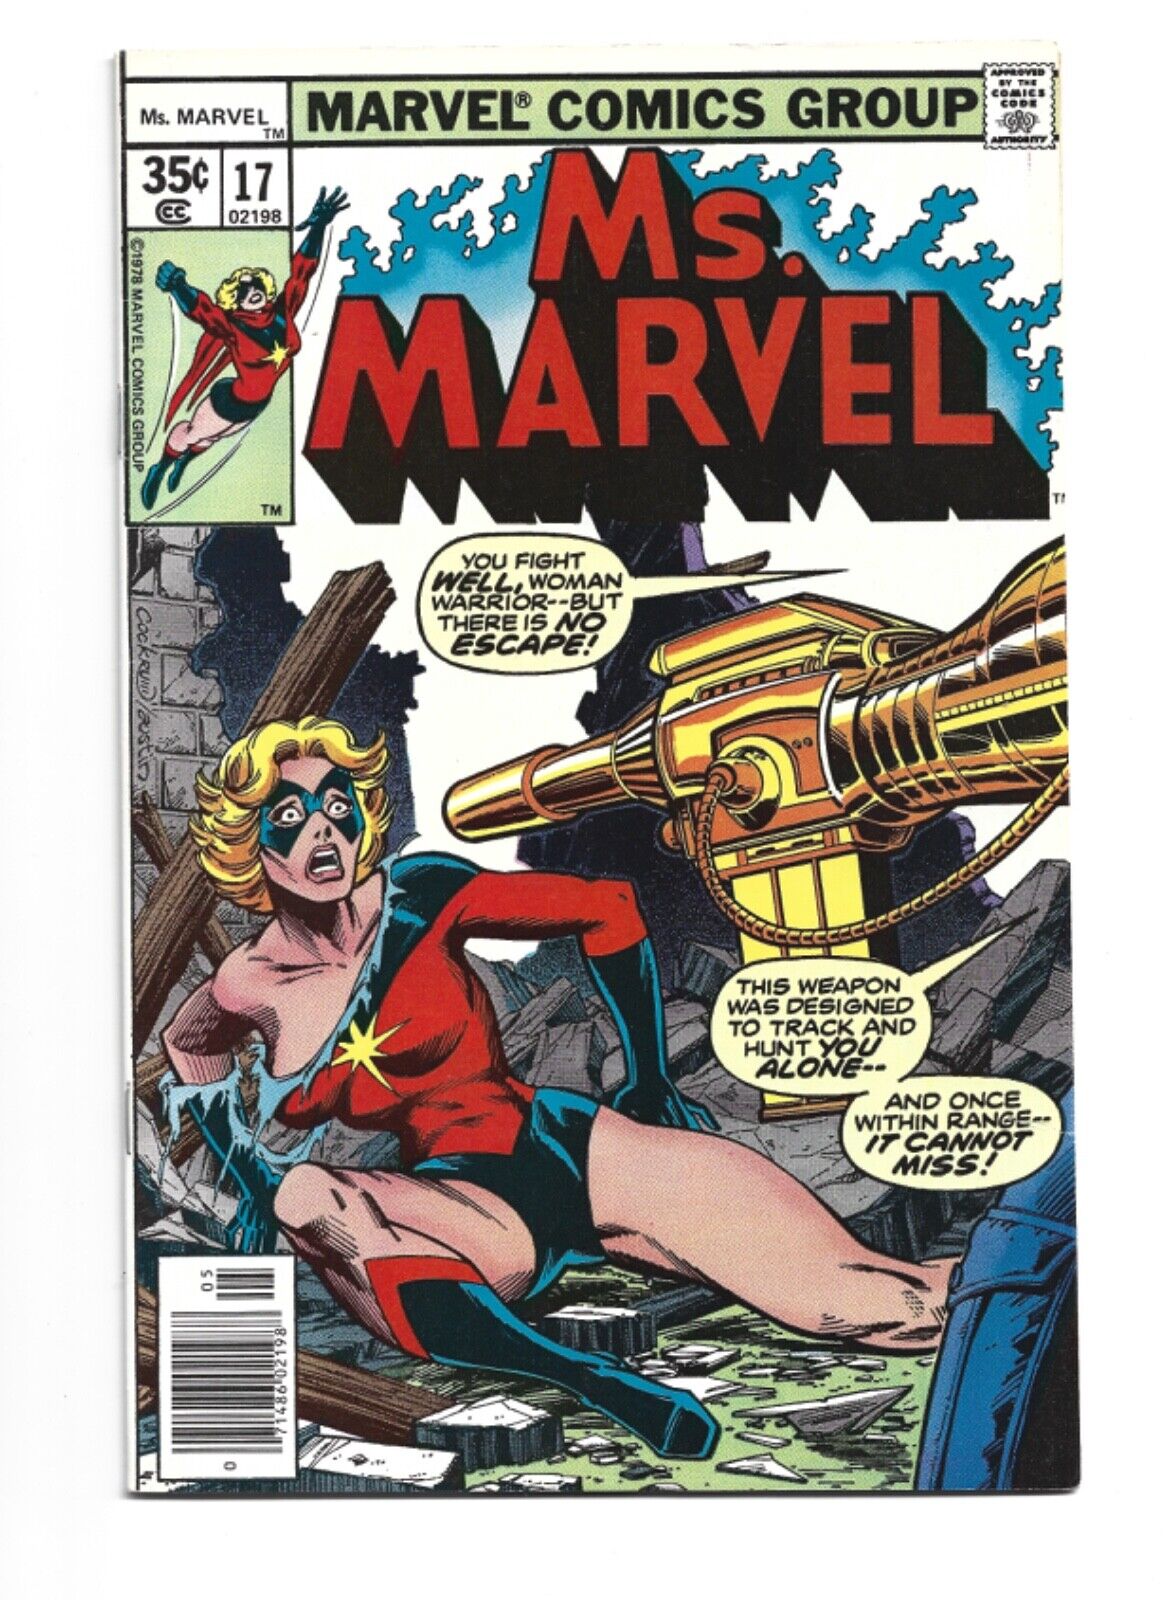 Ms. Marvel #17, FN 6.0, 2nd Cameo Appearance Mystique